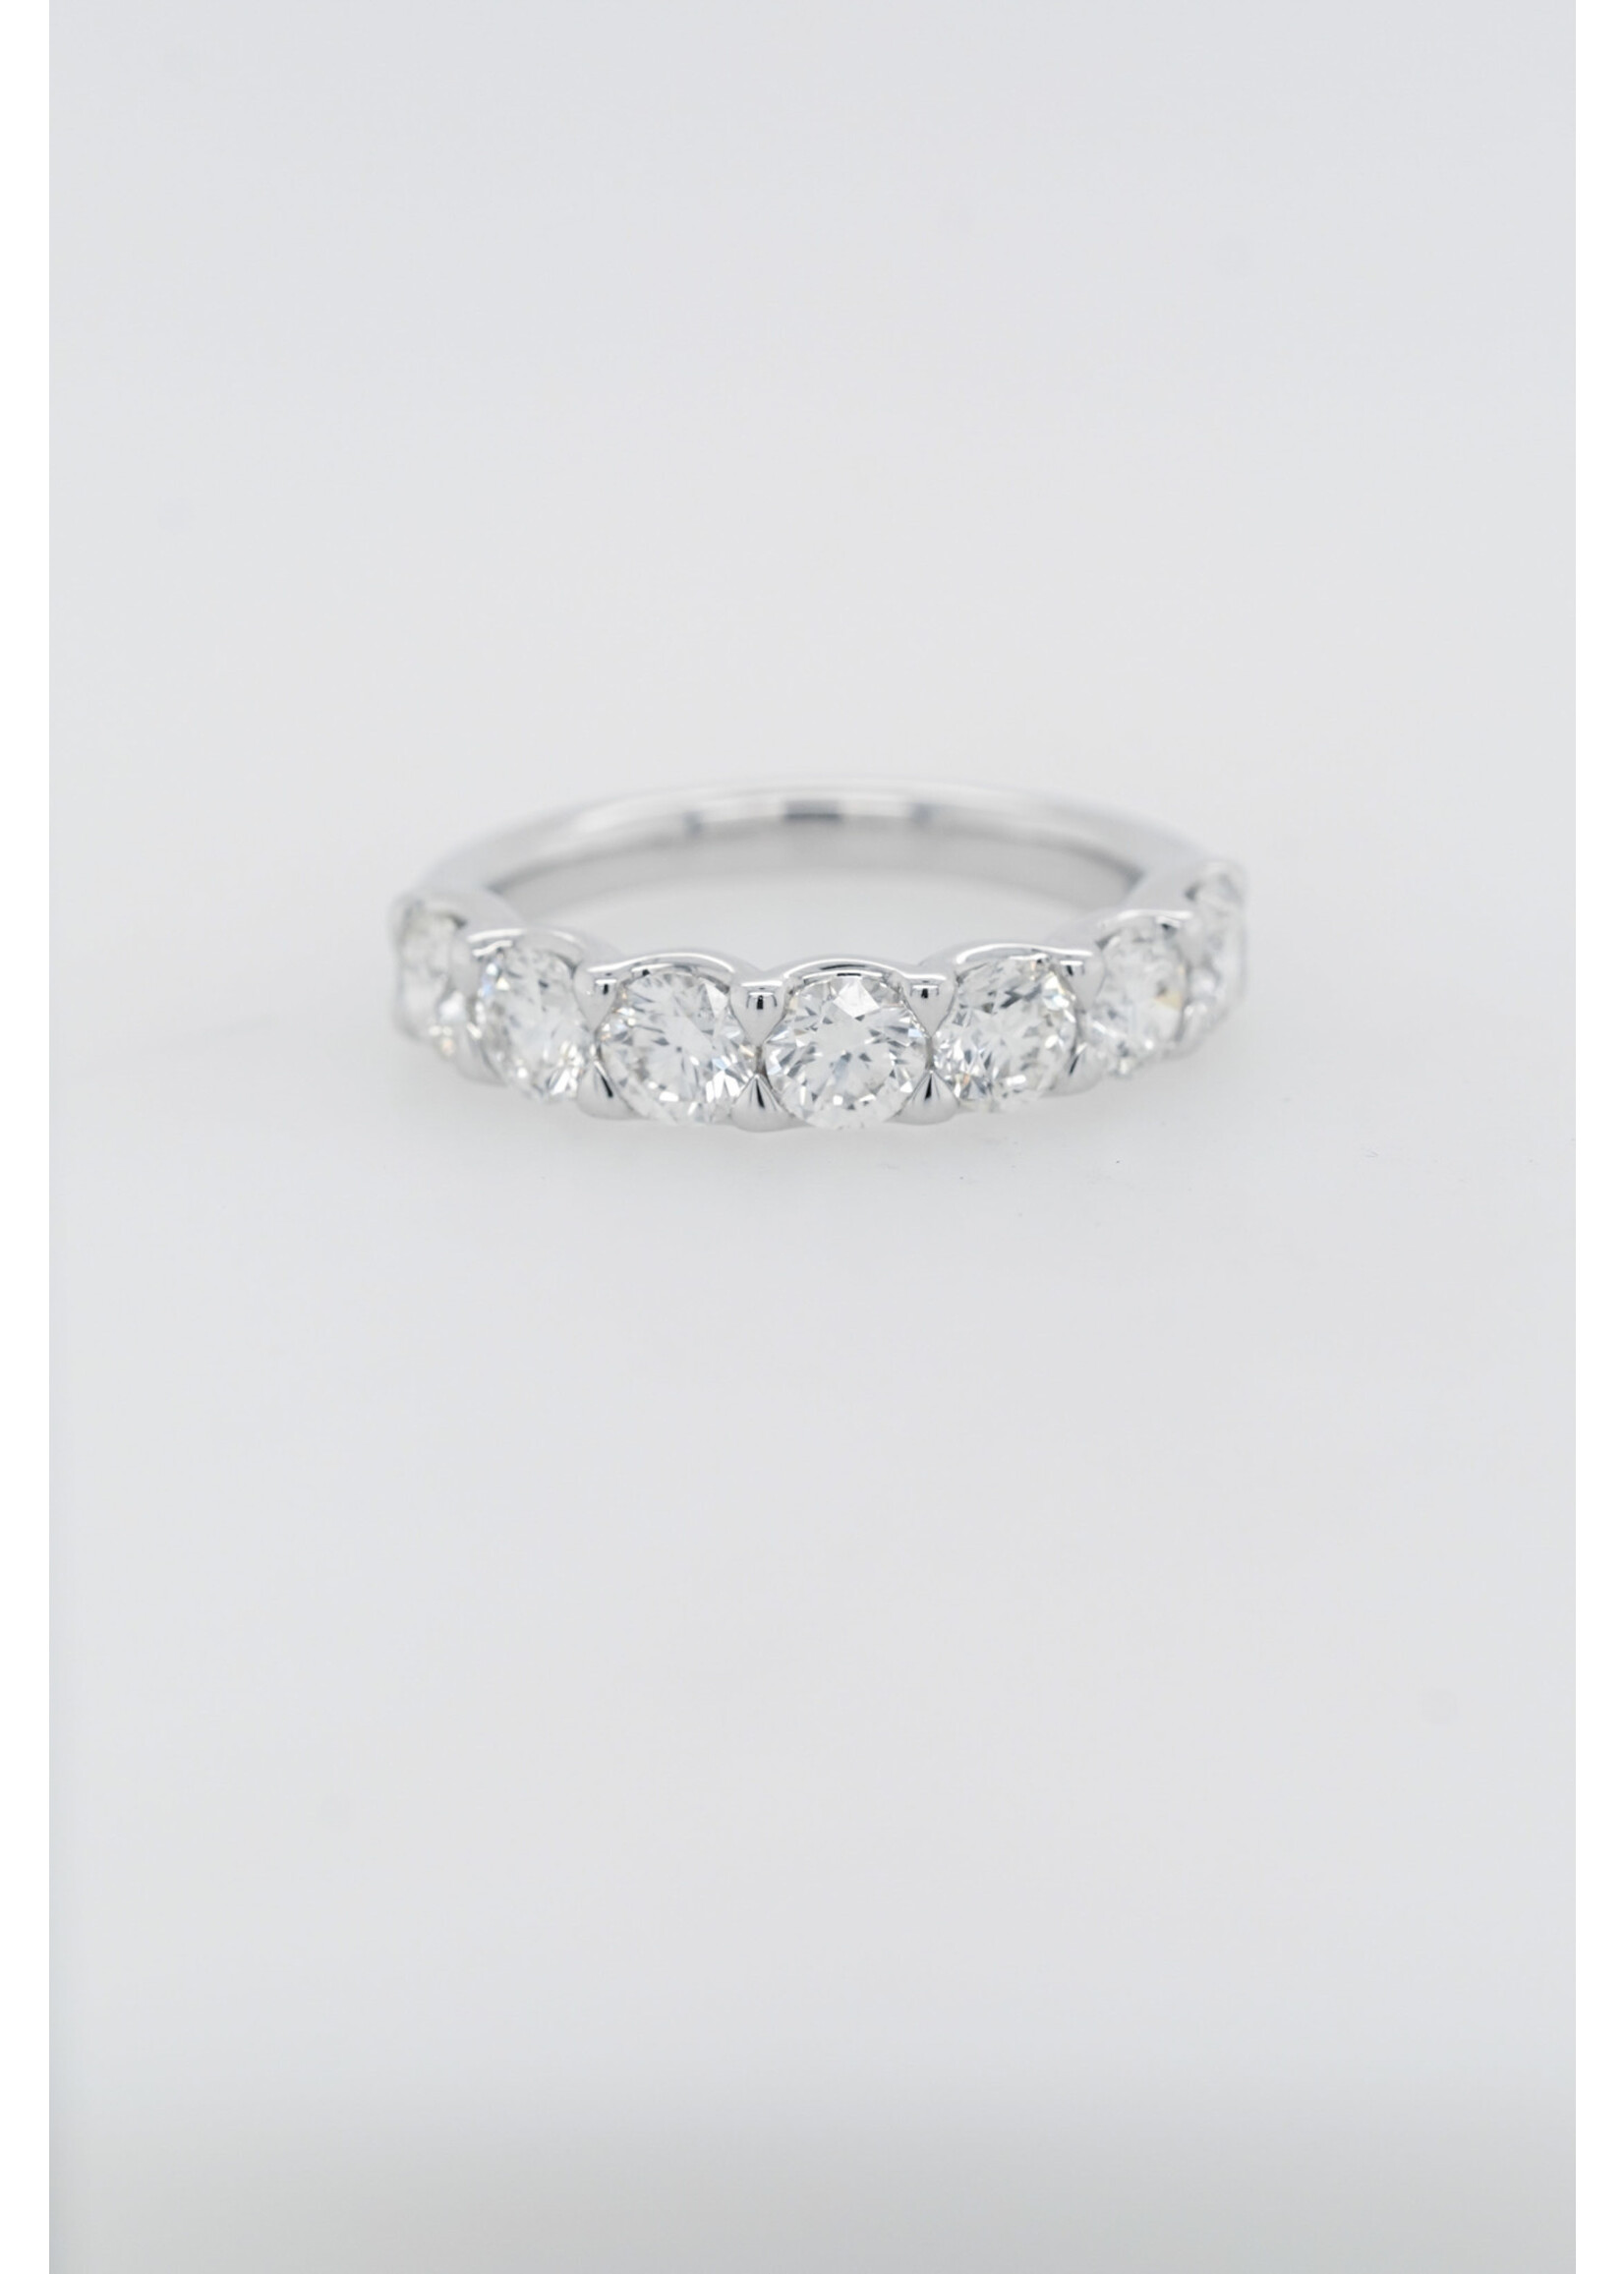 14KY 5.30g 2.30ctw Diamond U-Prong Stackable Band (size 6.5)